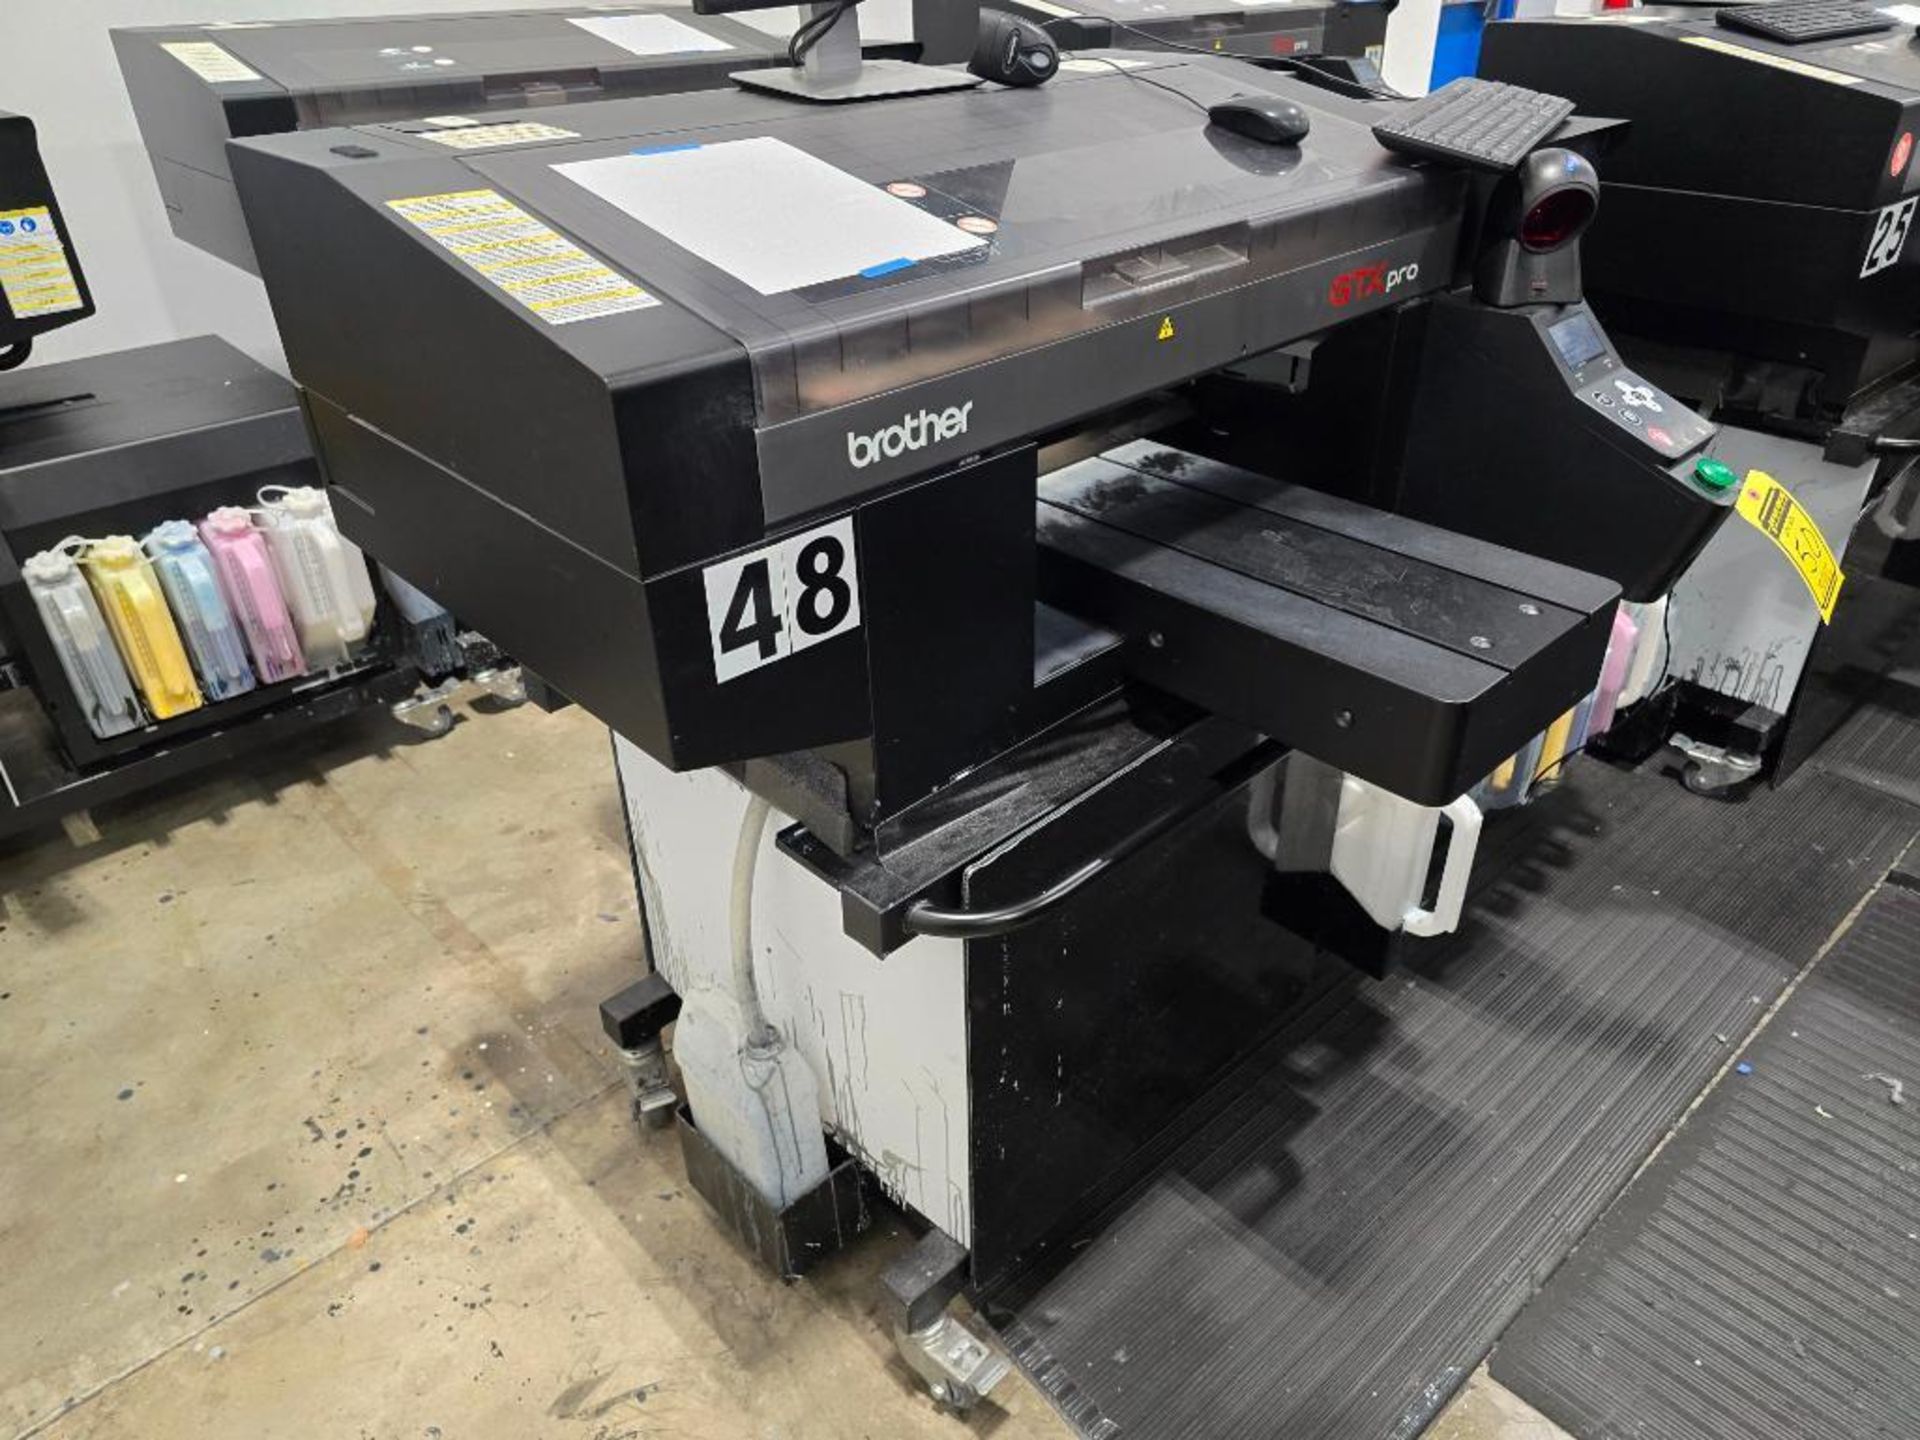 2022 Brother GTX-424 Pro-B DTG (Direct to Garment) Printer, Twin Head, 5-Color, Water Based Pigmente - Image 2 of 9